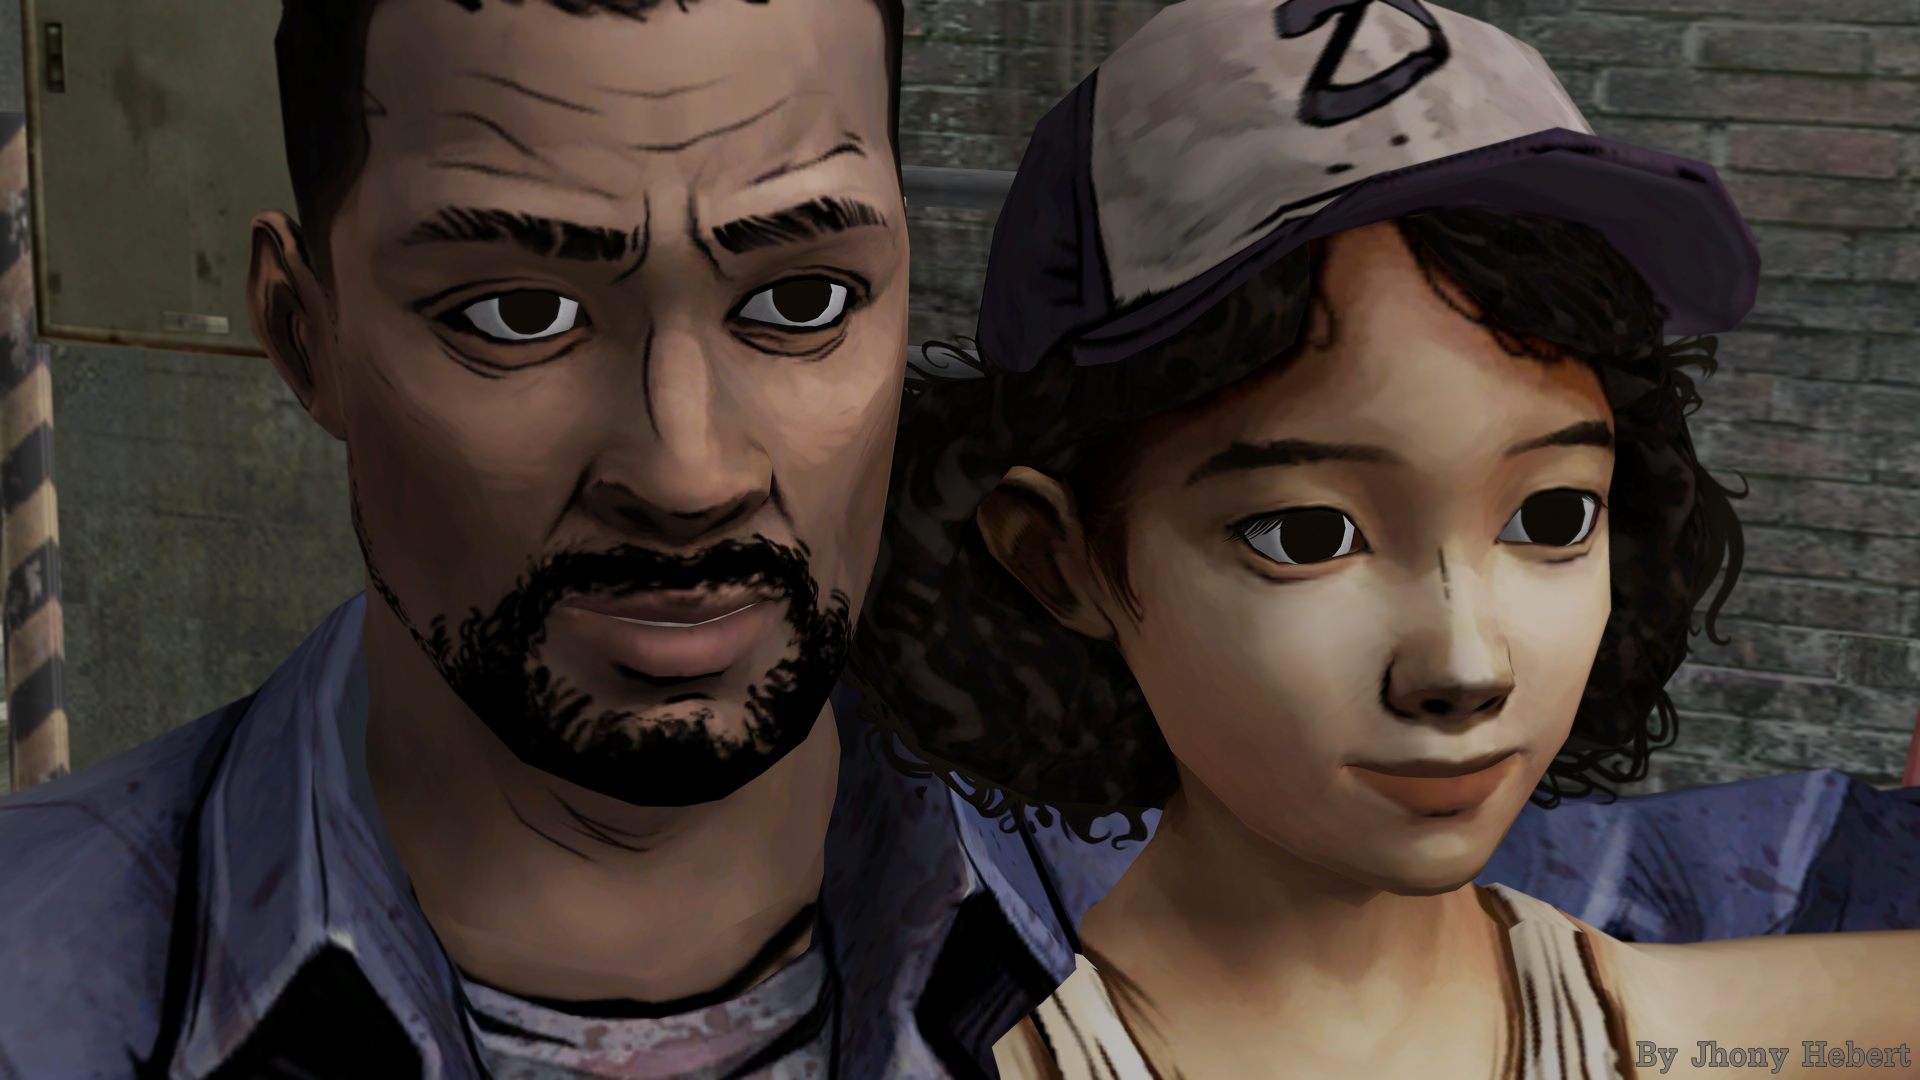 Lee and Clementine - The Walking Dead by JhonyHebert on DeviantArt